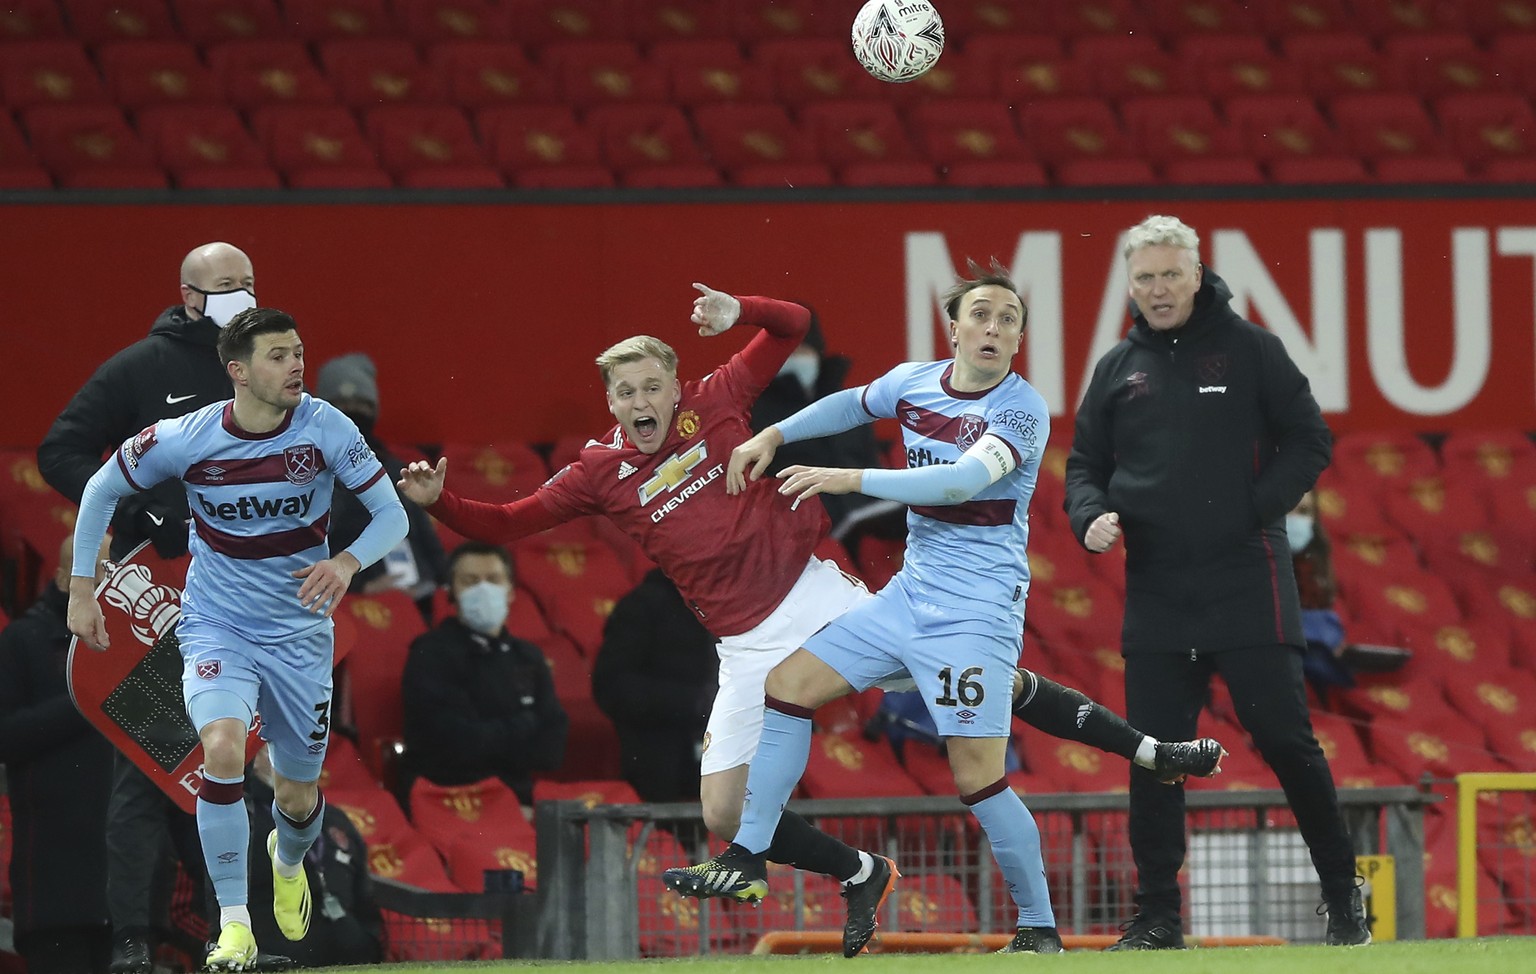 Manchester United&#039;s Donny van der Beek, left, challenges for the ball with West Ham&#039;s Mark Noble as West Ham&#039;s manager David Moyes watches during the English FA Cup 5th round soccer mat ...